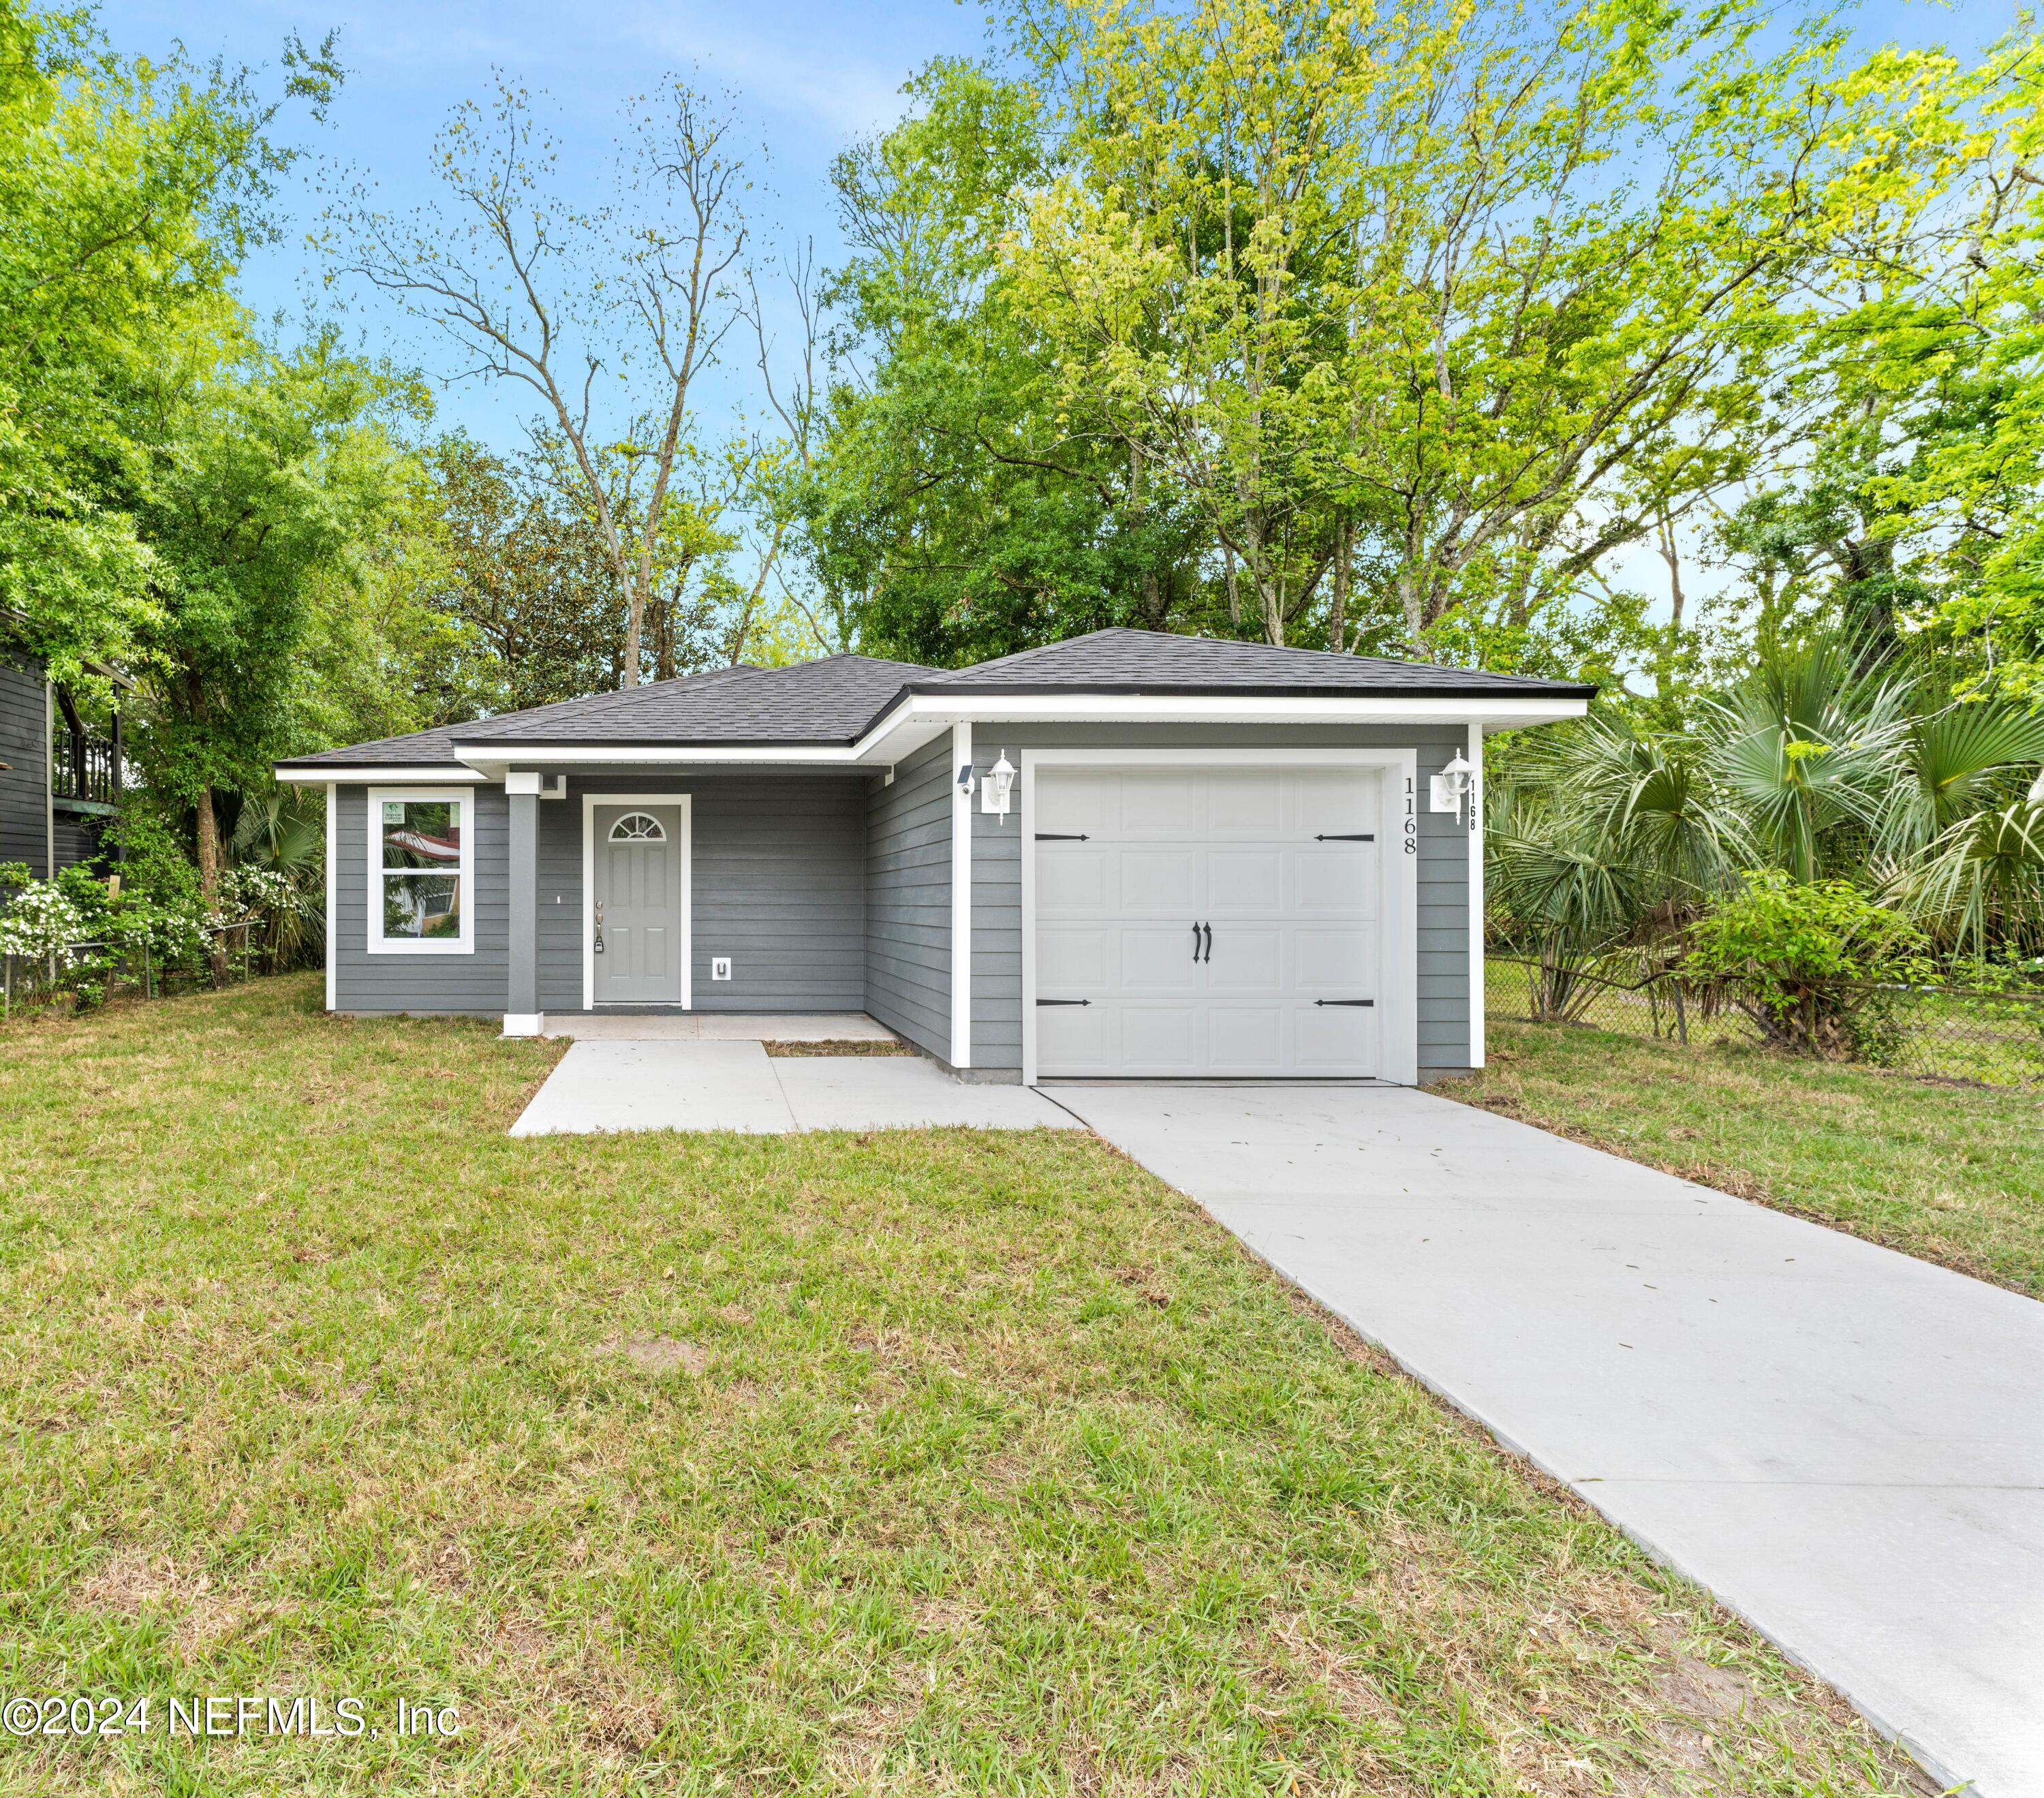 Jacksonville, FL home for sale located at 1168 W 24th Street, Jacksonville, FL 32209